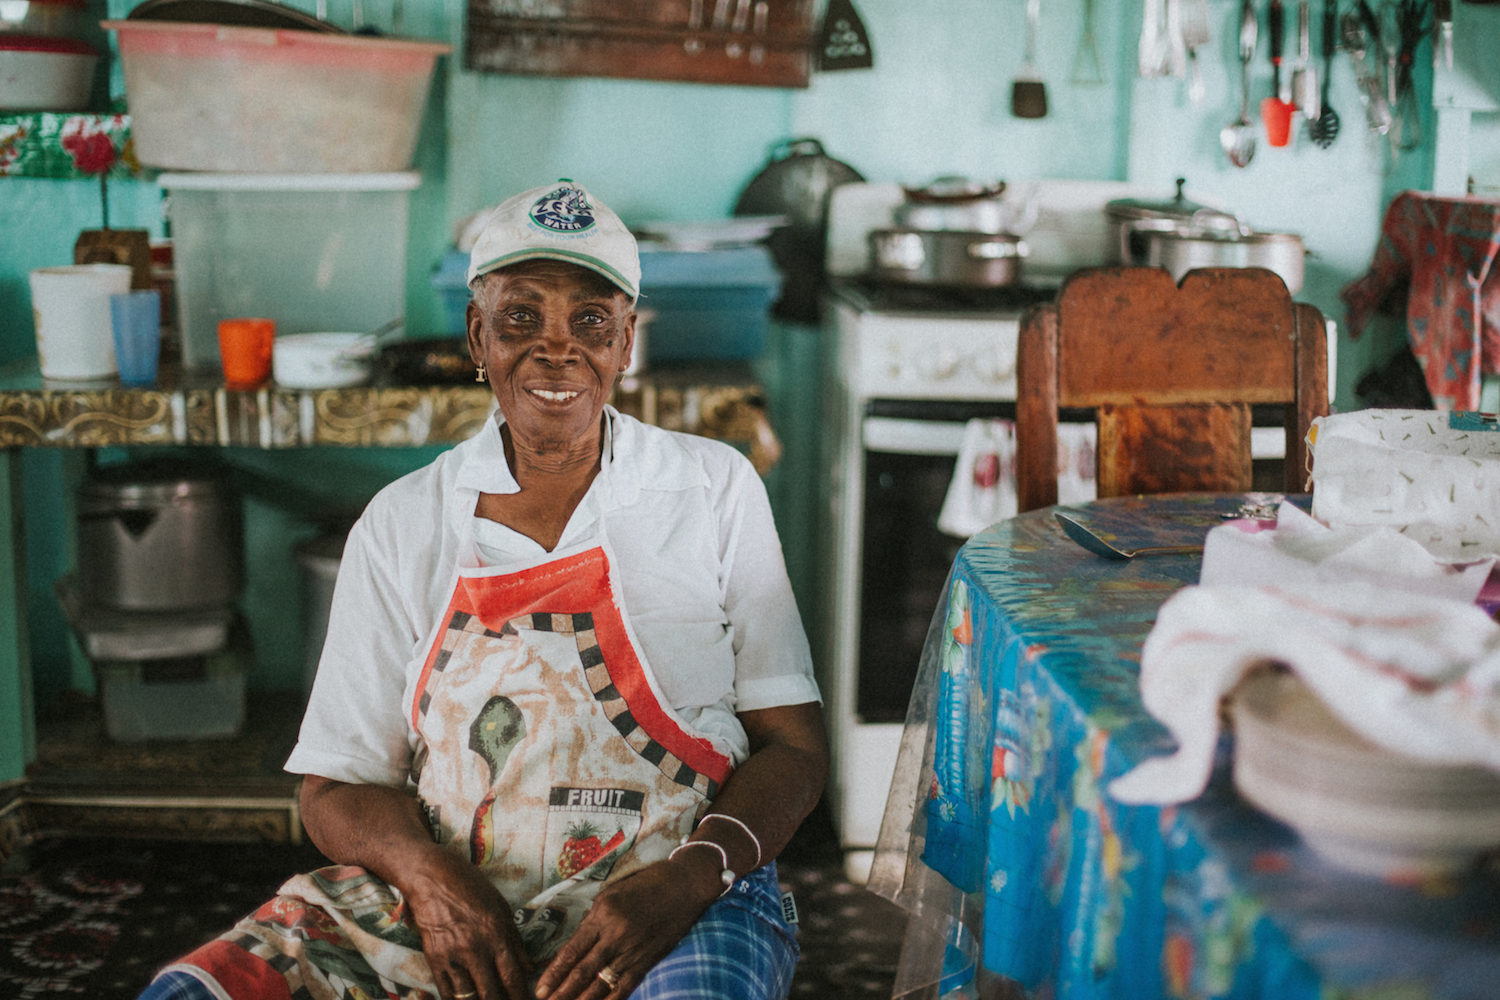  Ms. Gentle, her husband, and their daughter run Gentle's Cool Spot, the hotspot of the village where people come to enjoy traditional creole food and beverages, including Belikin, the official beer of Belize, and homemade wines. 